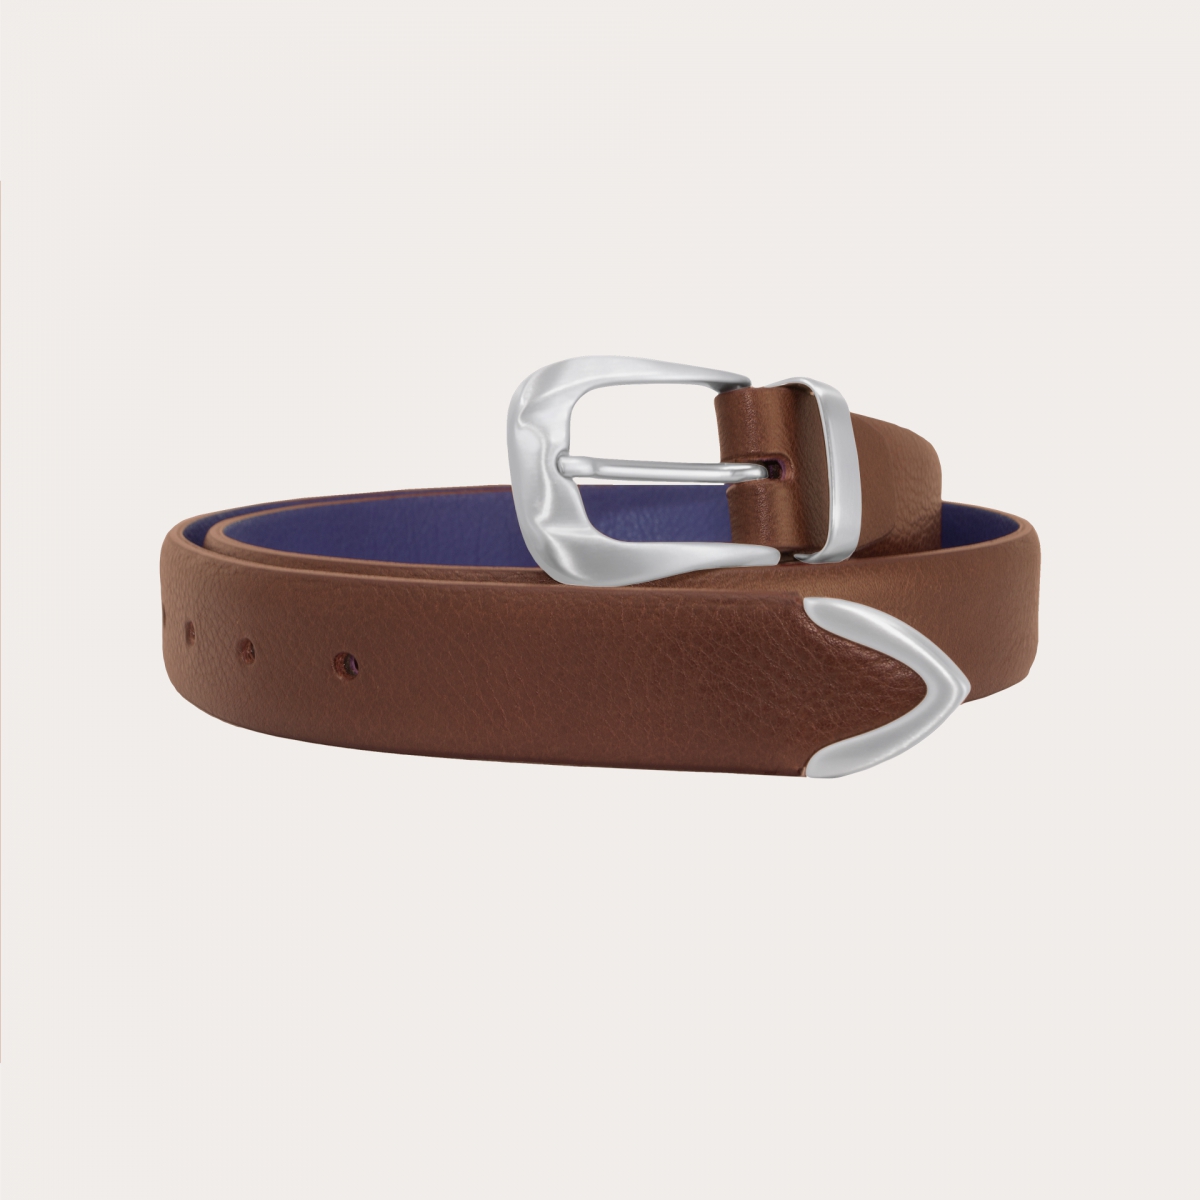 Thin raw cut leather belt with loop, buckle and tip in metal, brown cognac